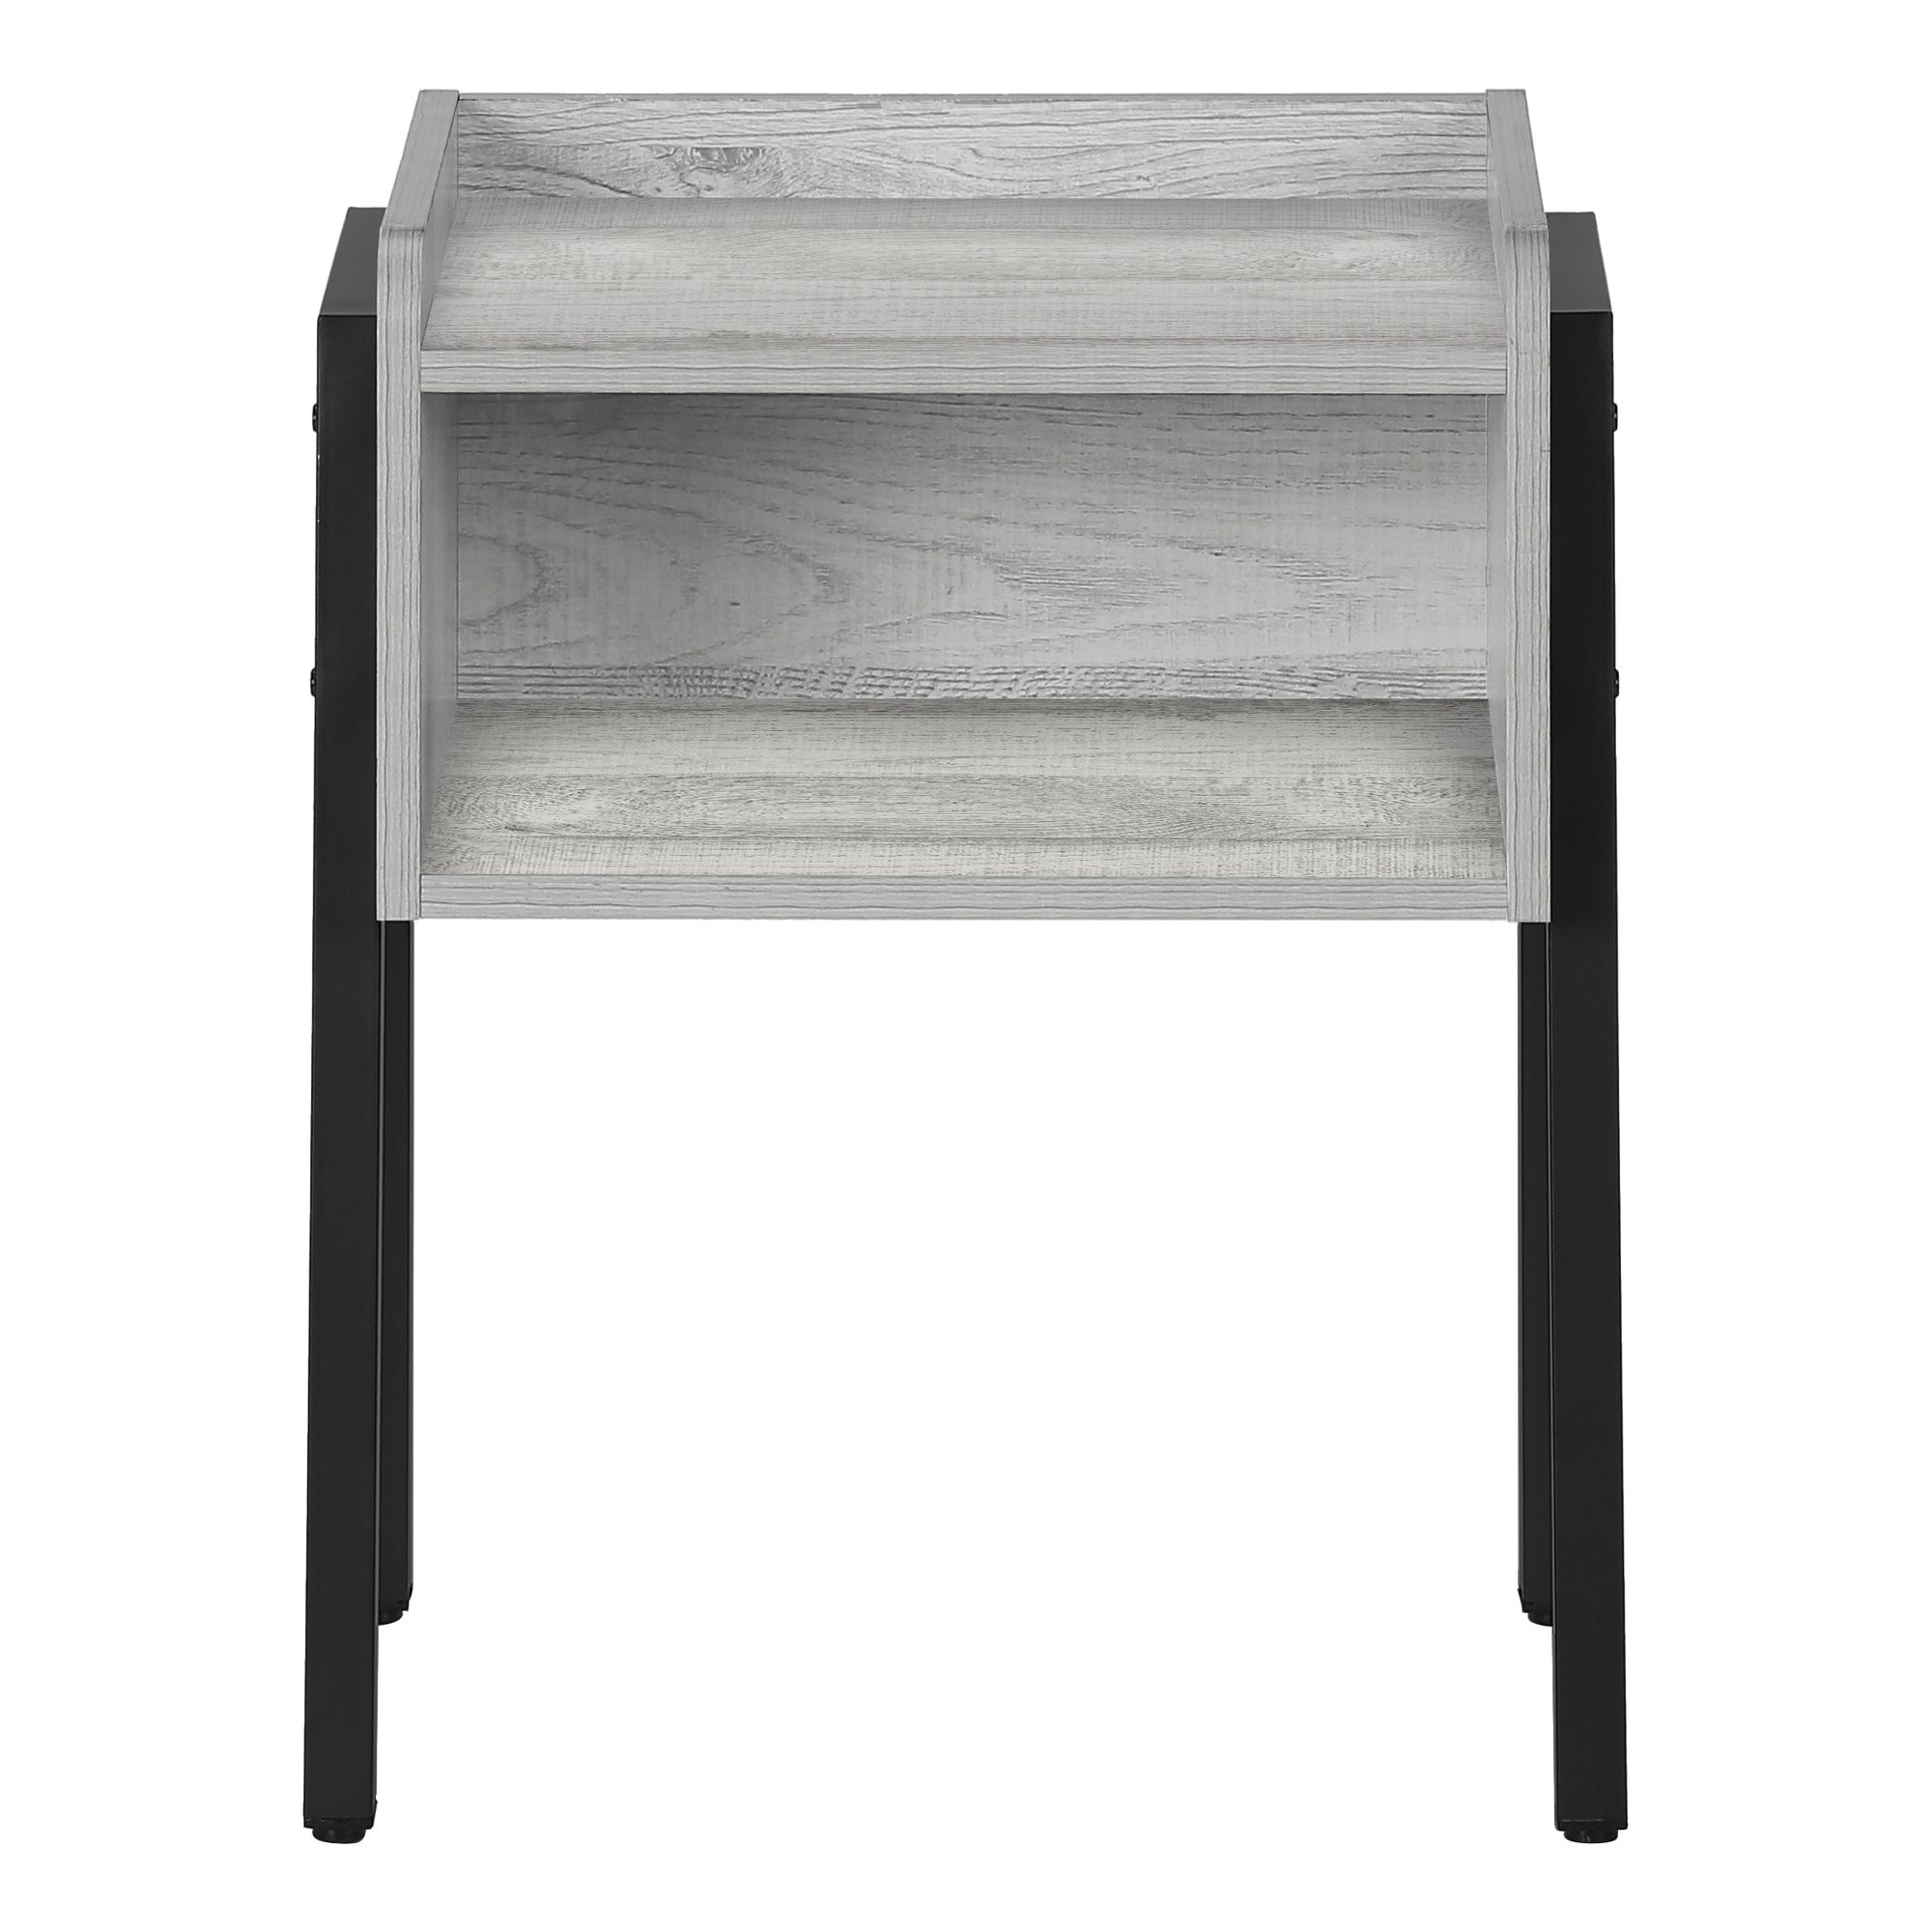 MN-493591    Accent Table, Side, End, Nightstand, Lamp, Living Room, Bedroom, Metal Legs, Laminate, Grey, Black, Contemporary, Modern